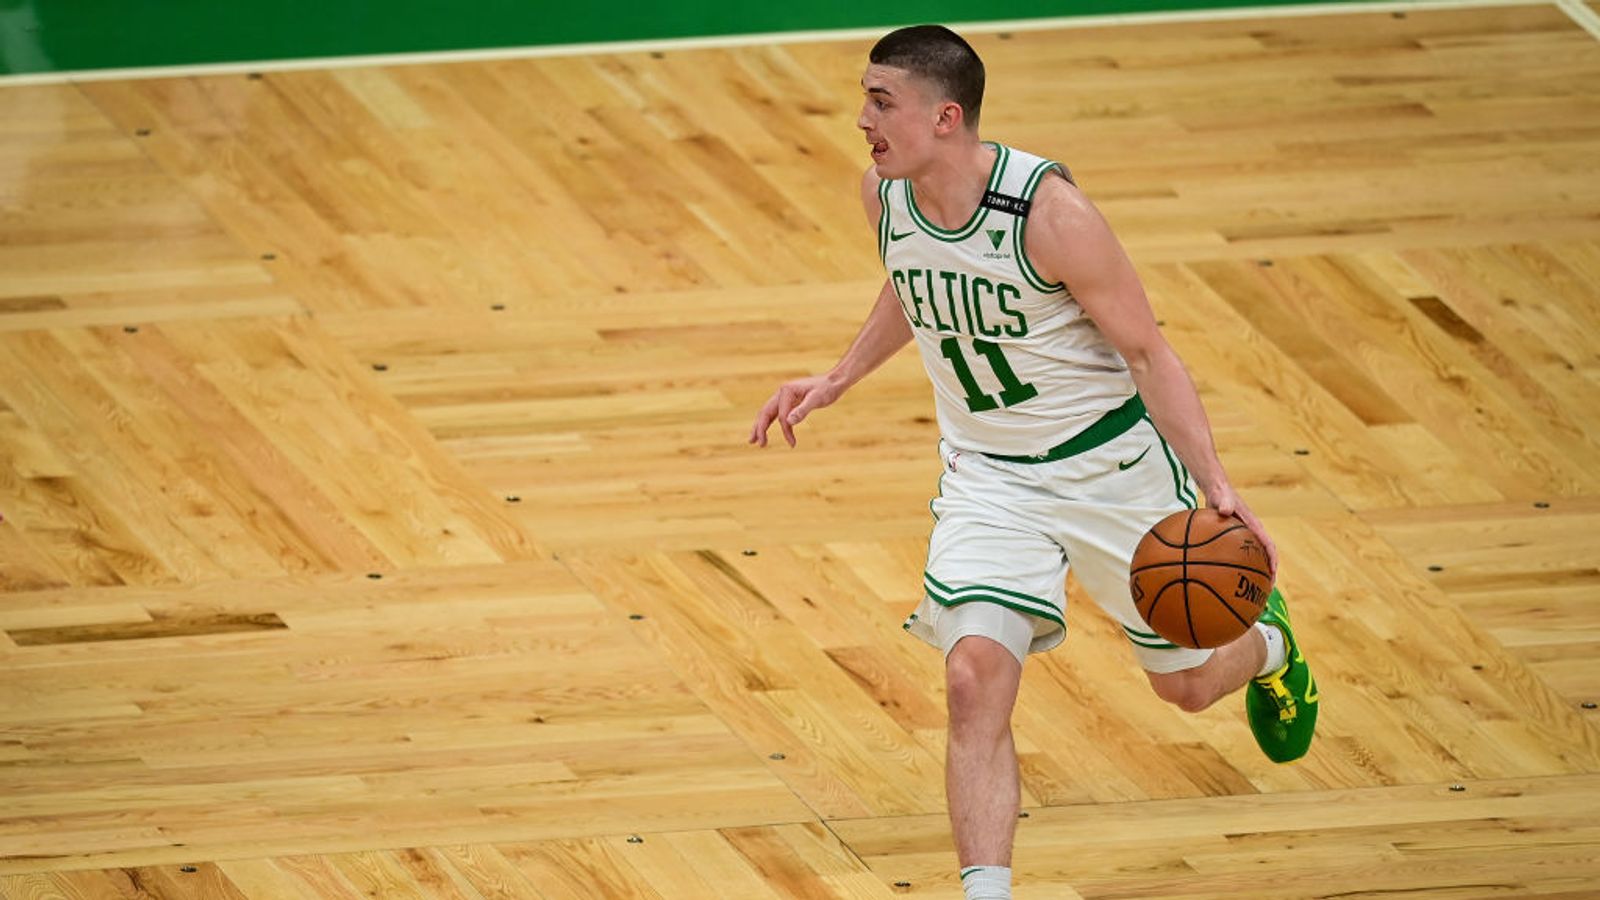 The Boston Celtics need to give Payton Pritchard more playing time